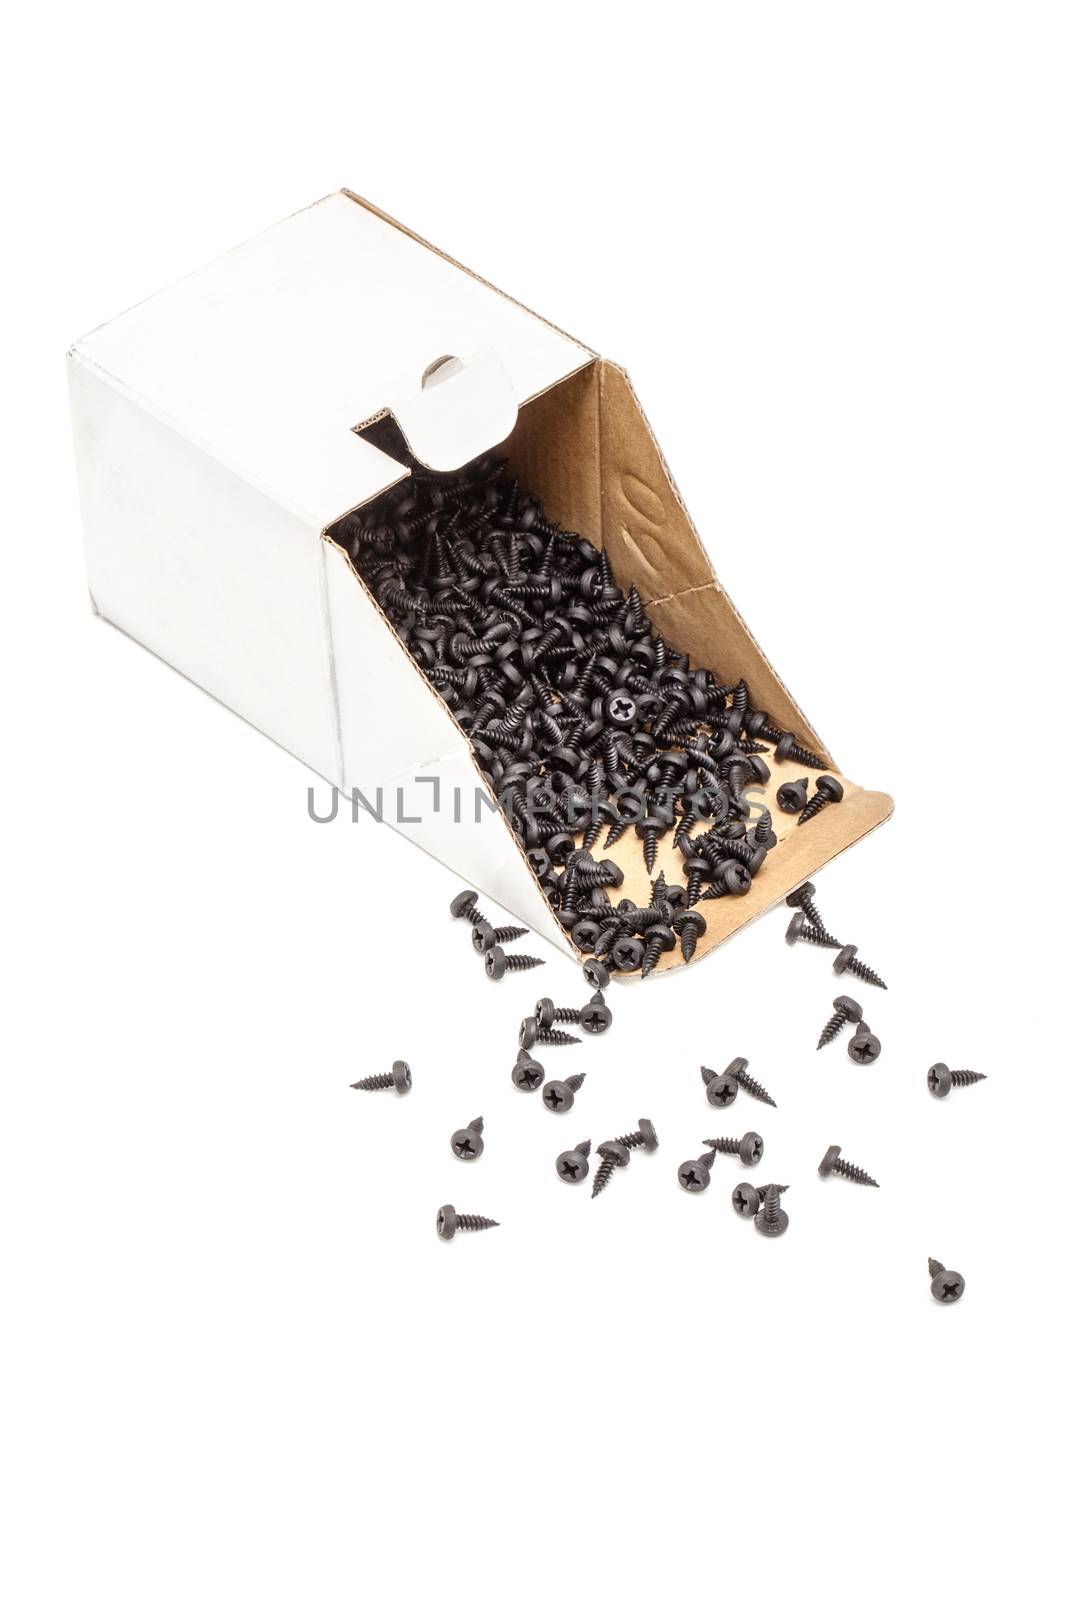 group of black screws in a box by kokimk